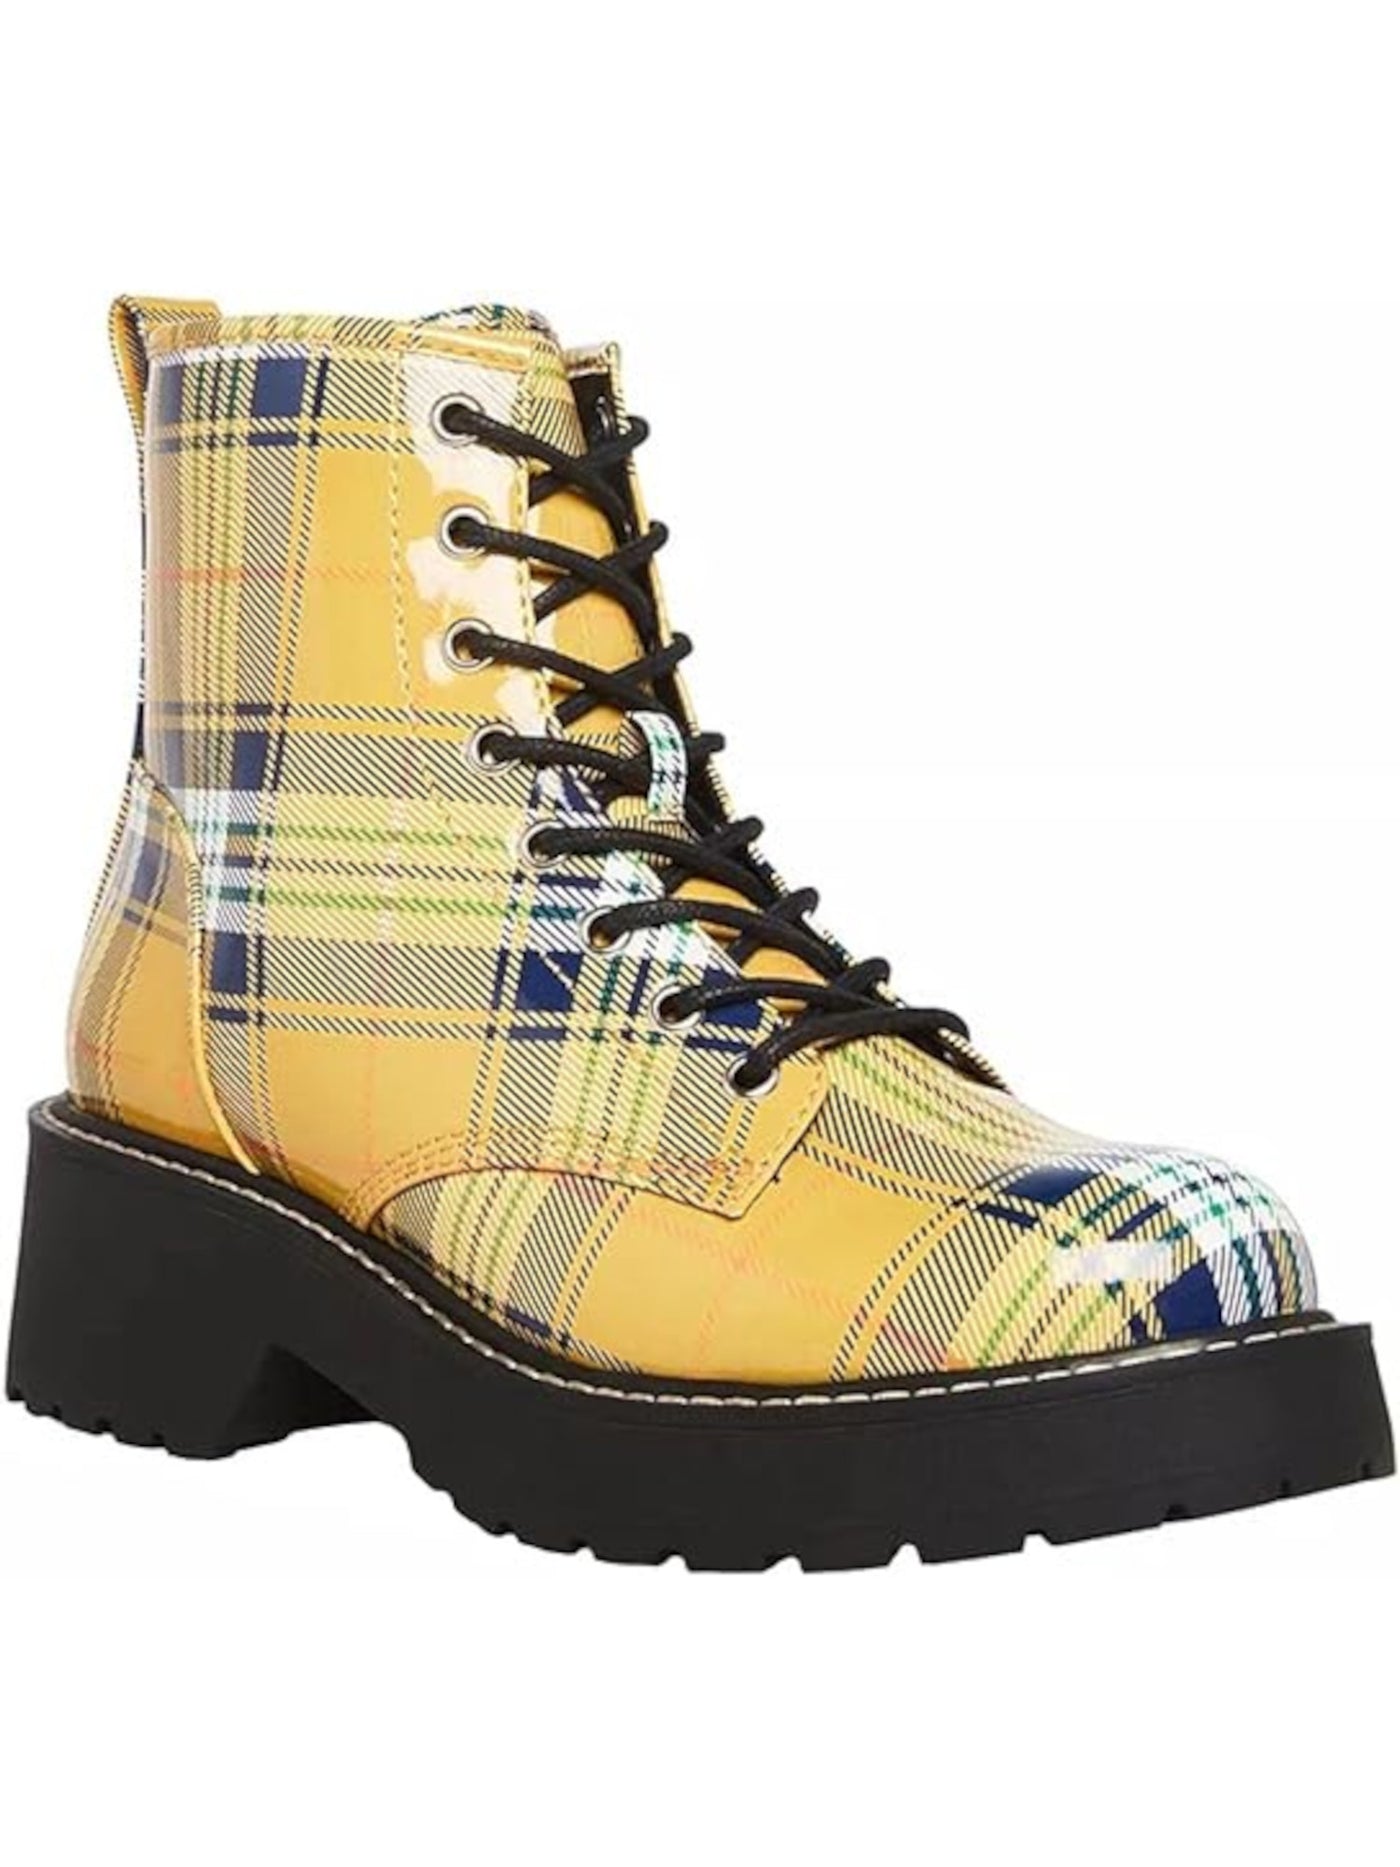 MADDEN GIRL Womens Yellow Plaid Lace-Up Pull-Tab Lug Sole Padded Carra Round Toe Block Heel Zip-Up Combat Boots 5 M